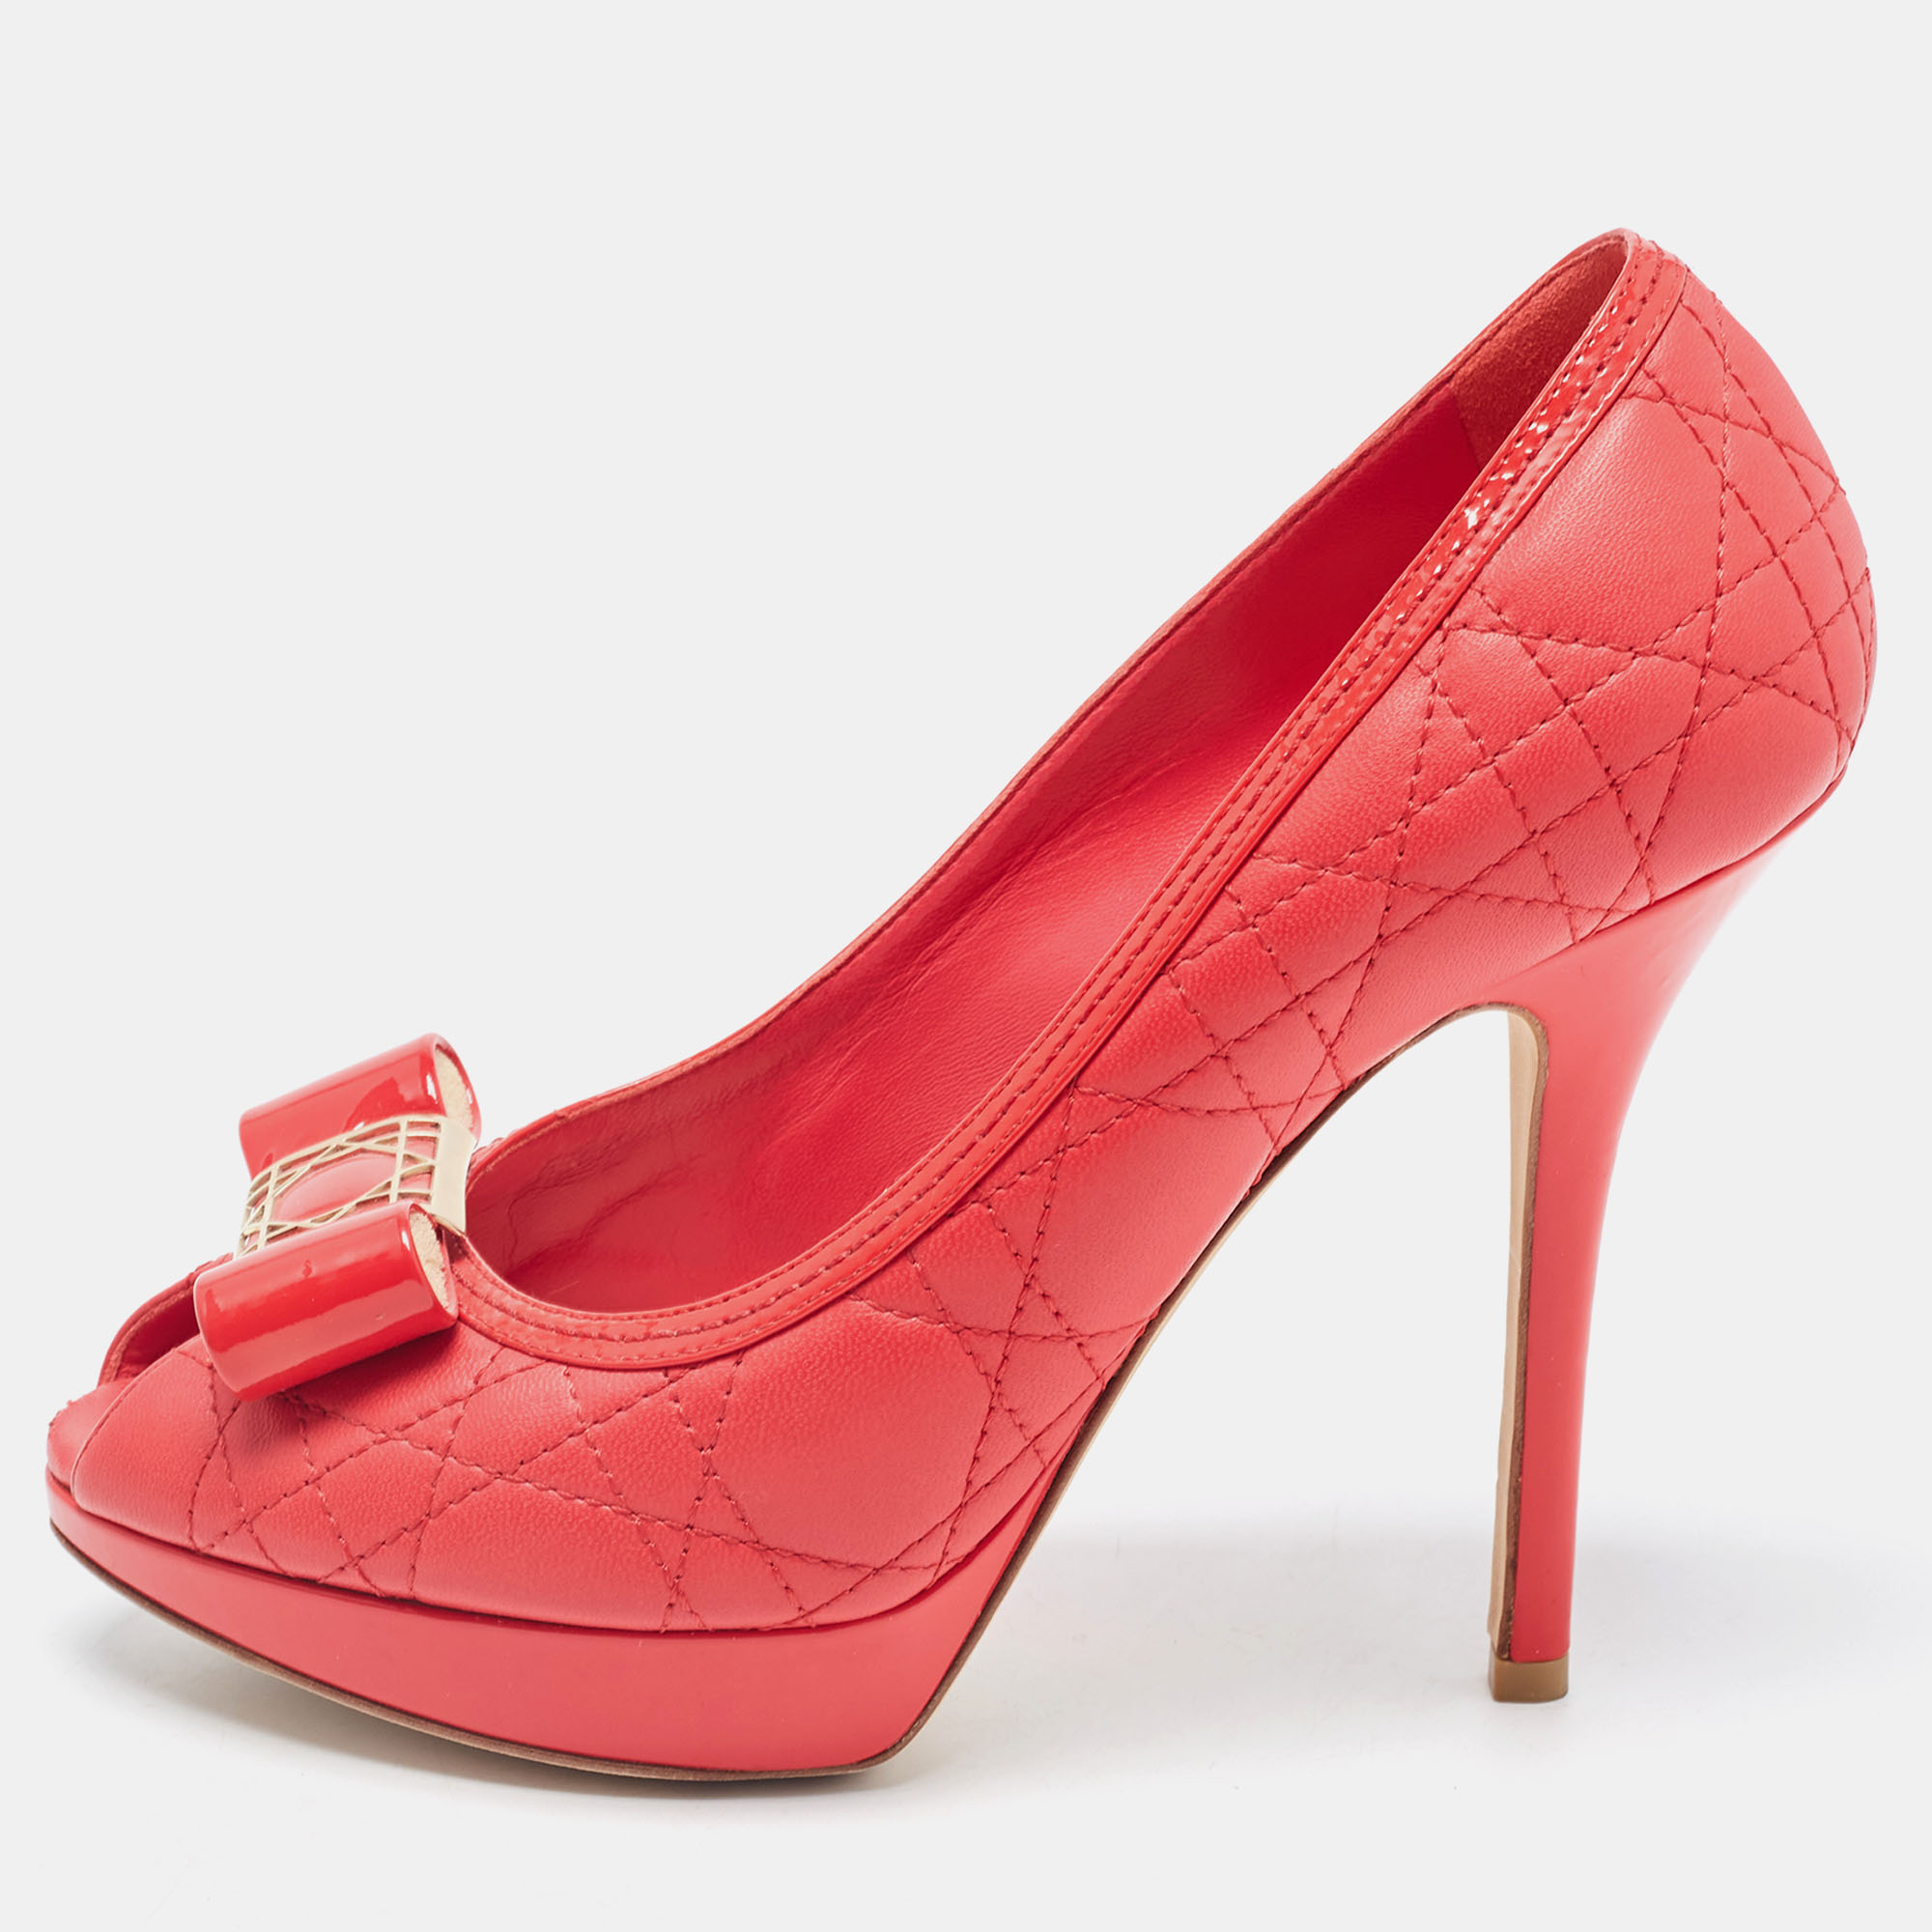 Dior Red Cannage Leather Bow Peep Toe Platform Pumps Size 37